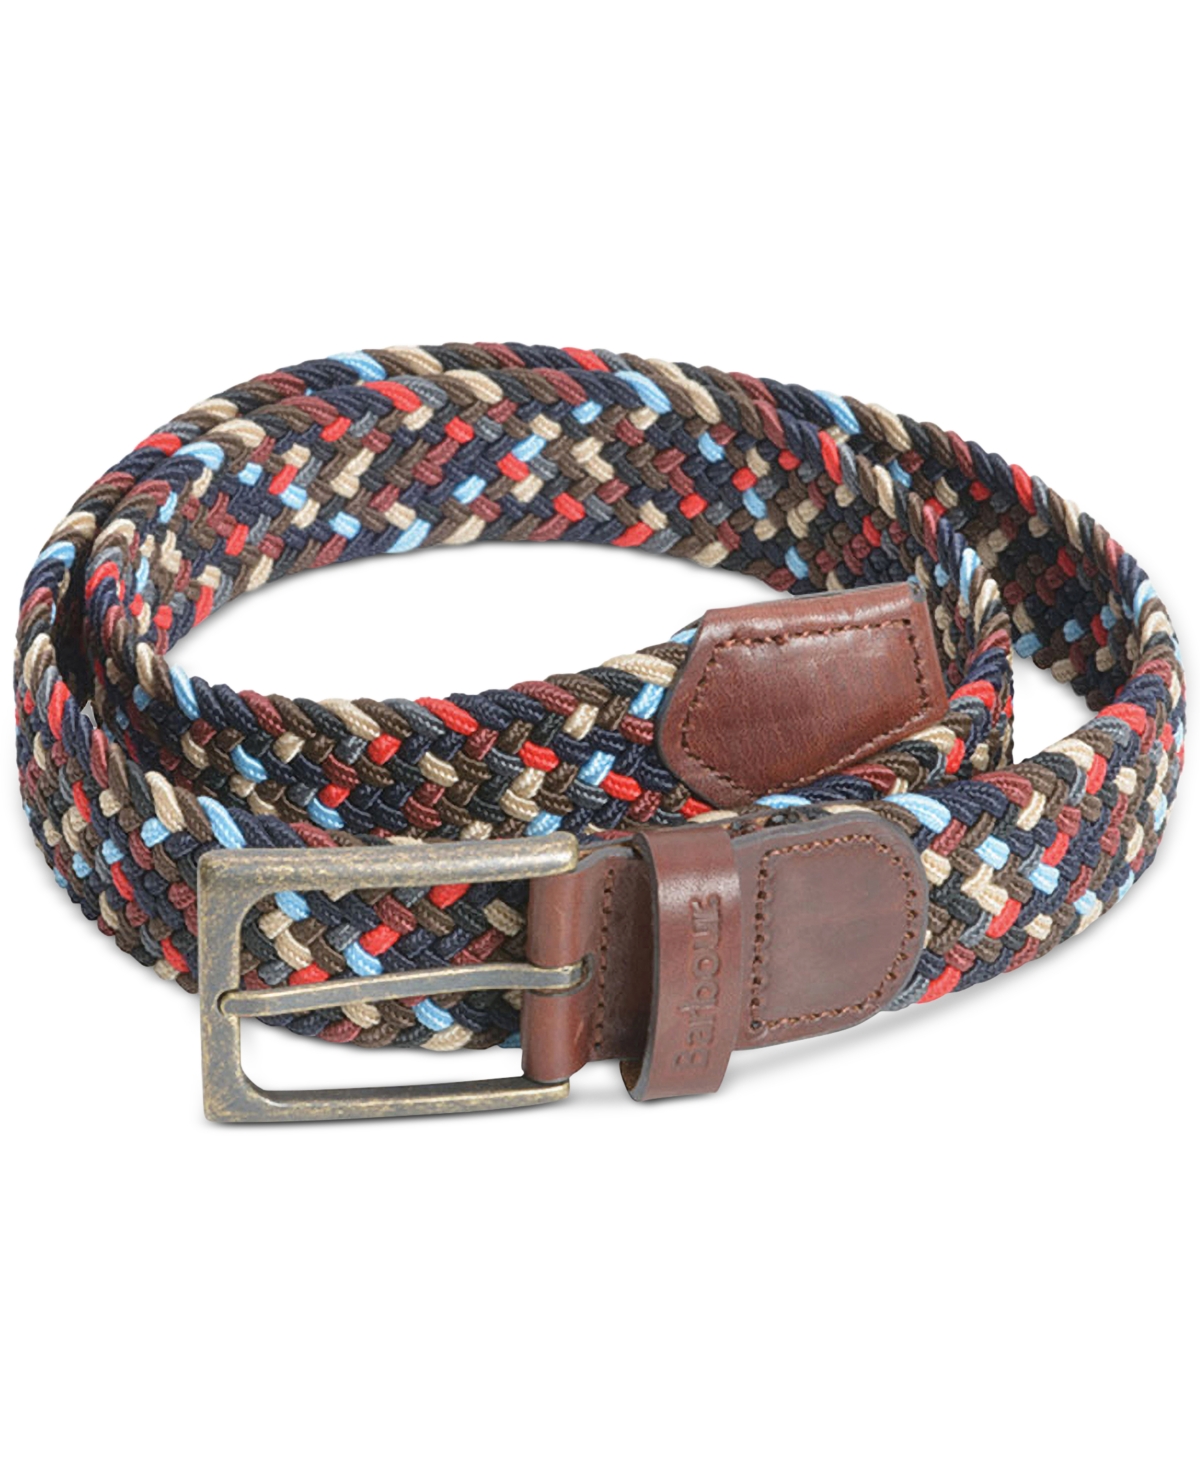 Men's Ford Webbing Belt with Faux-Leather Trim - Navy